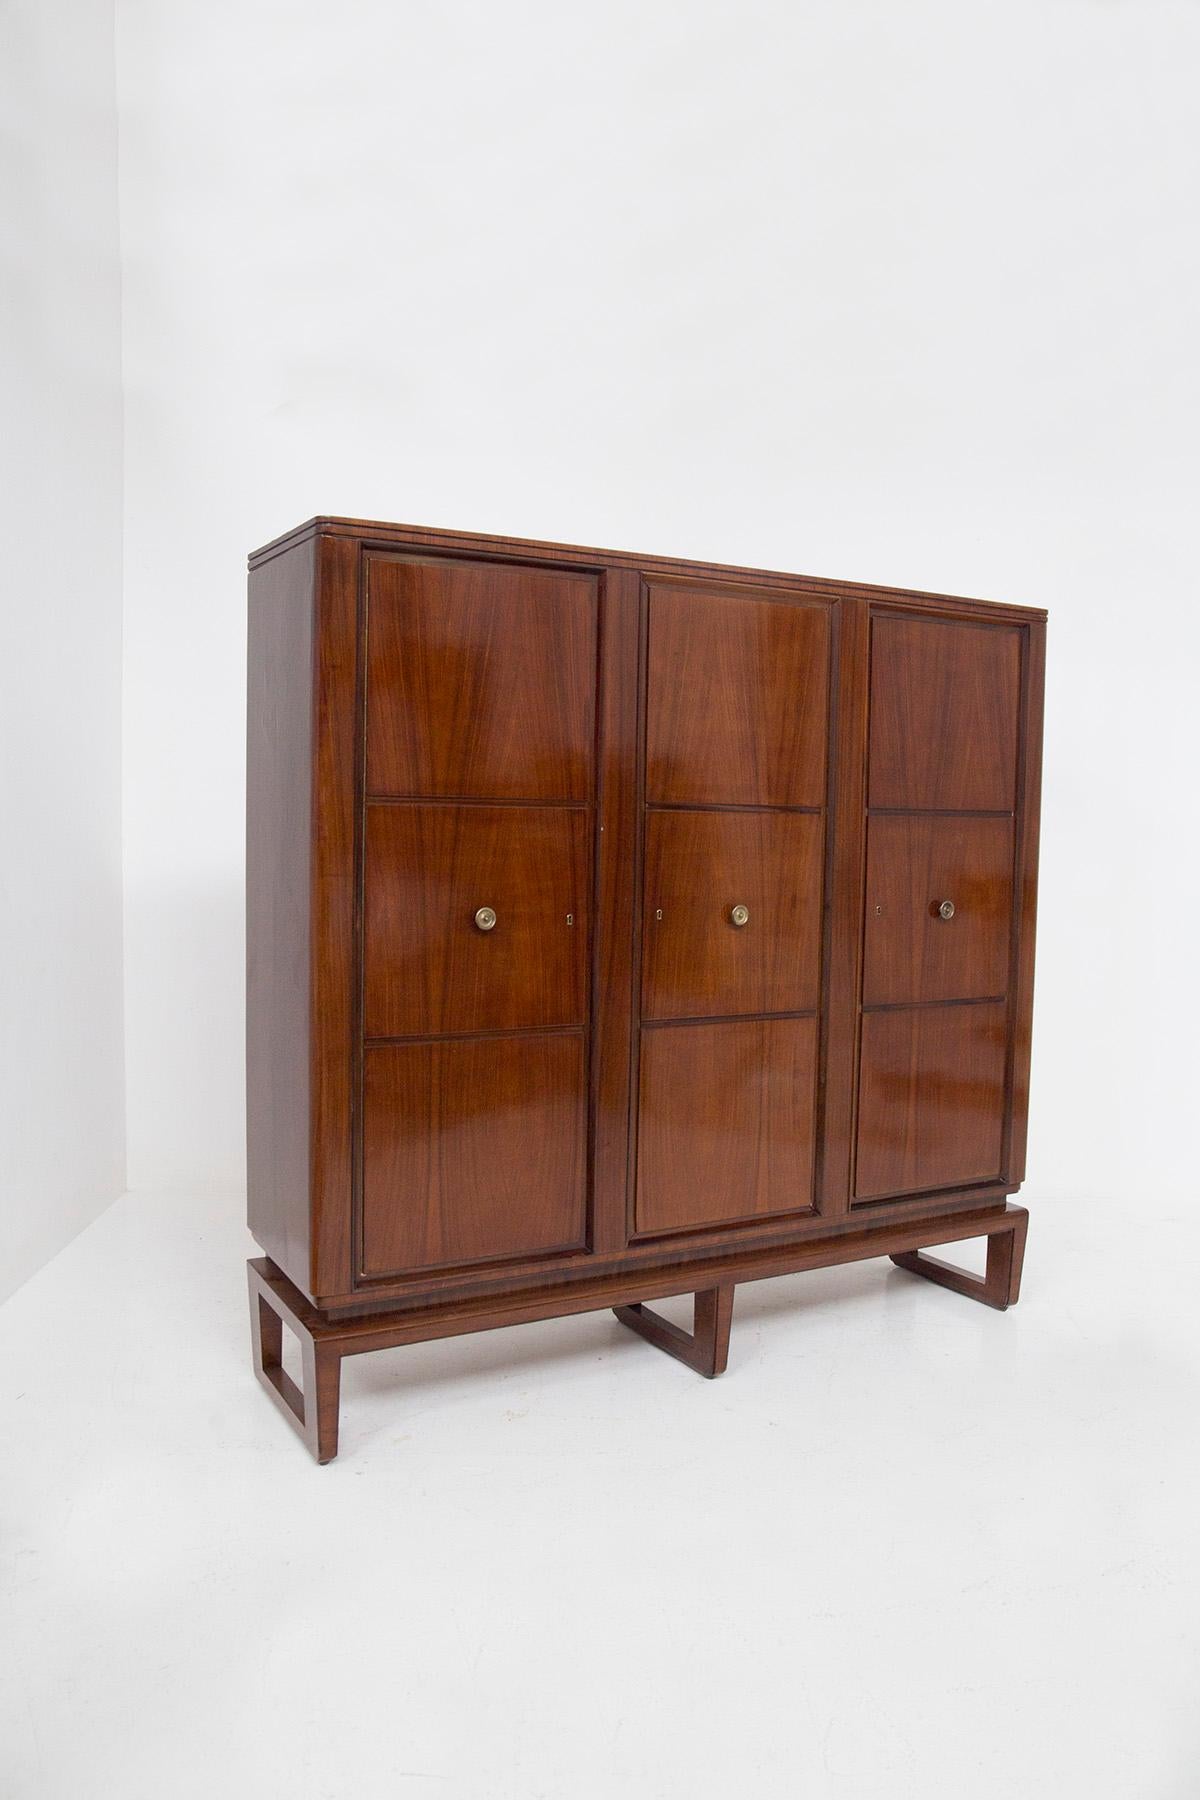 Behold the majestic Mid-Century cabinet designed by Paolo Buffa for the prestigious Italian manufacturer, Serafino Arrighi, dating back to the glamorous 1950s. This imposing piece of furniture is a testament to the enduring allure of Mid-Century